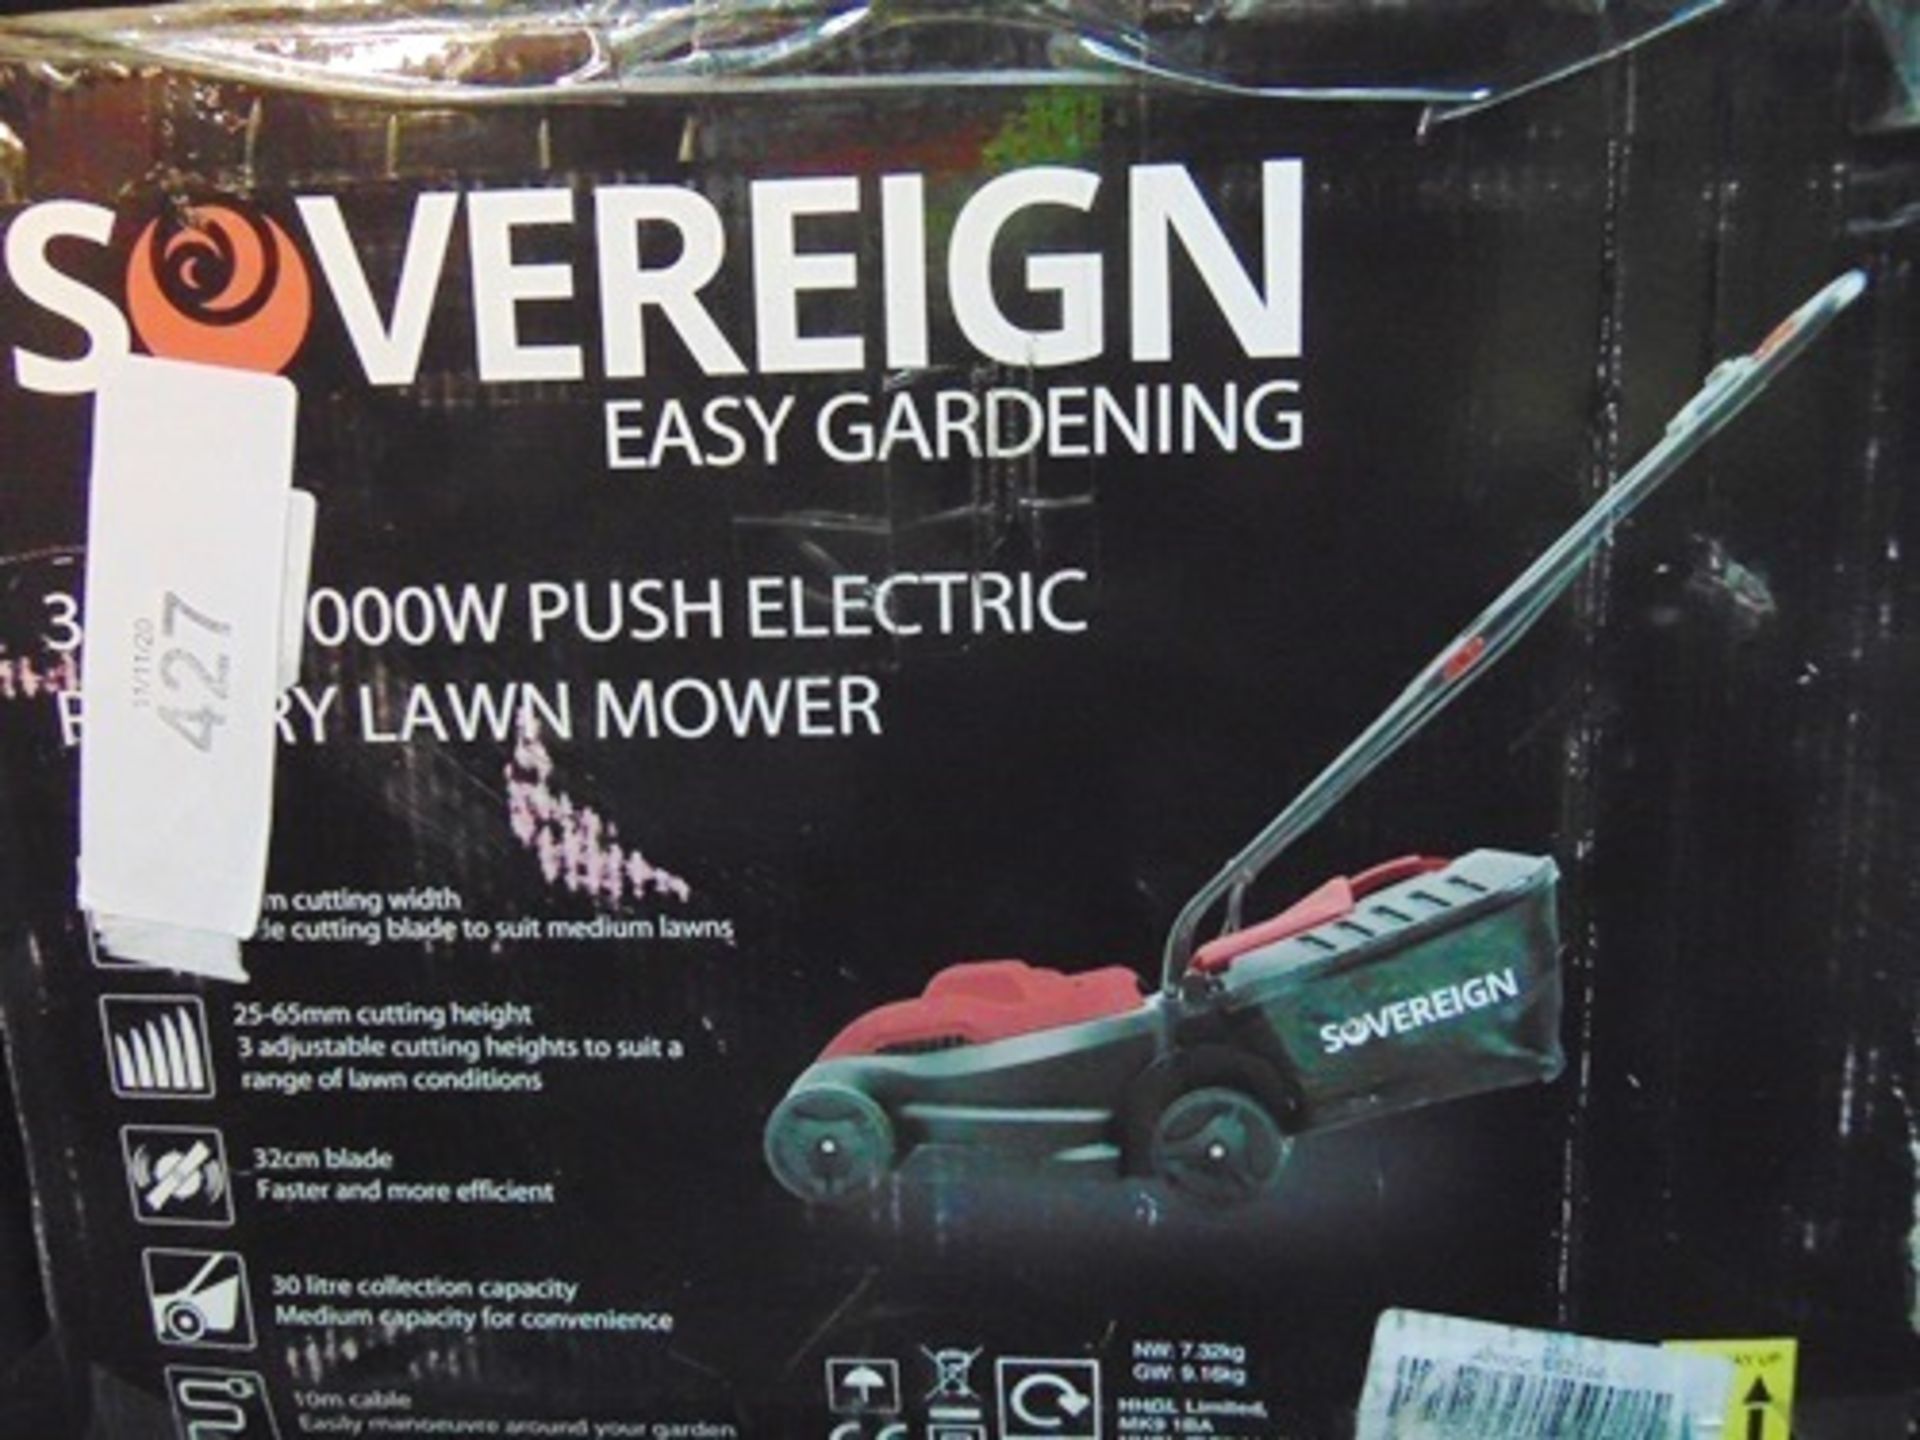 A Sovereign 40cm push petrol rotary lawnmower, together with a Sovereign 32cm 1000W push electric - Image 2 of 3